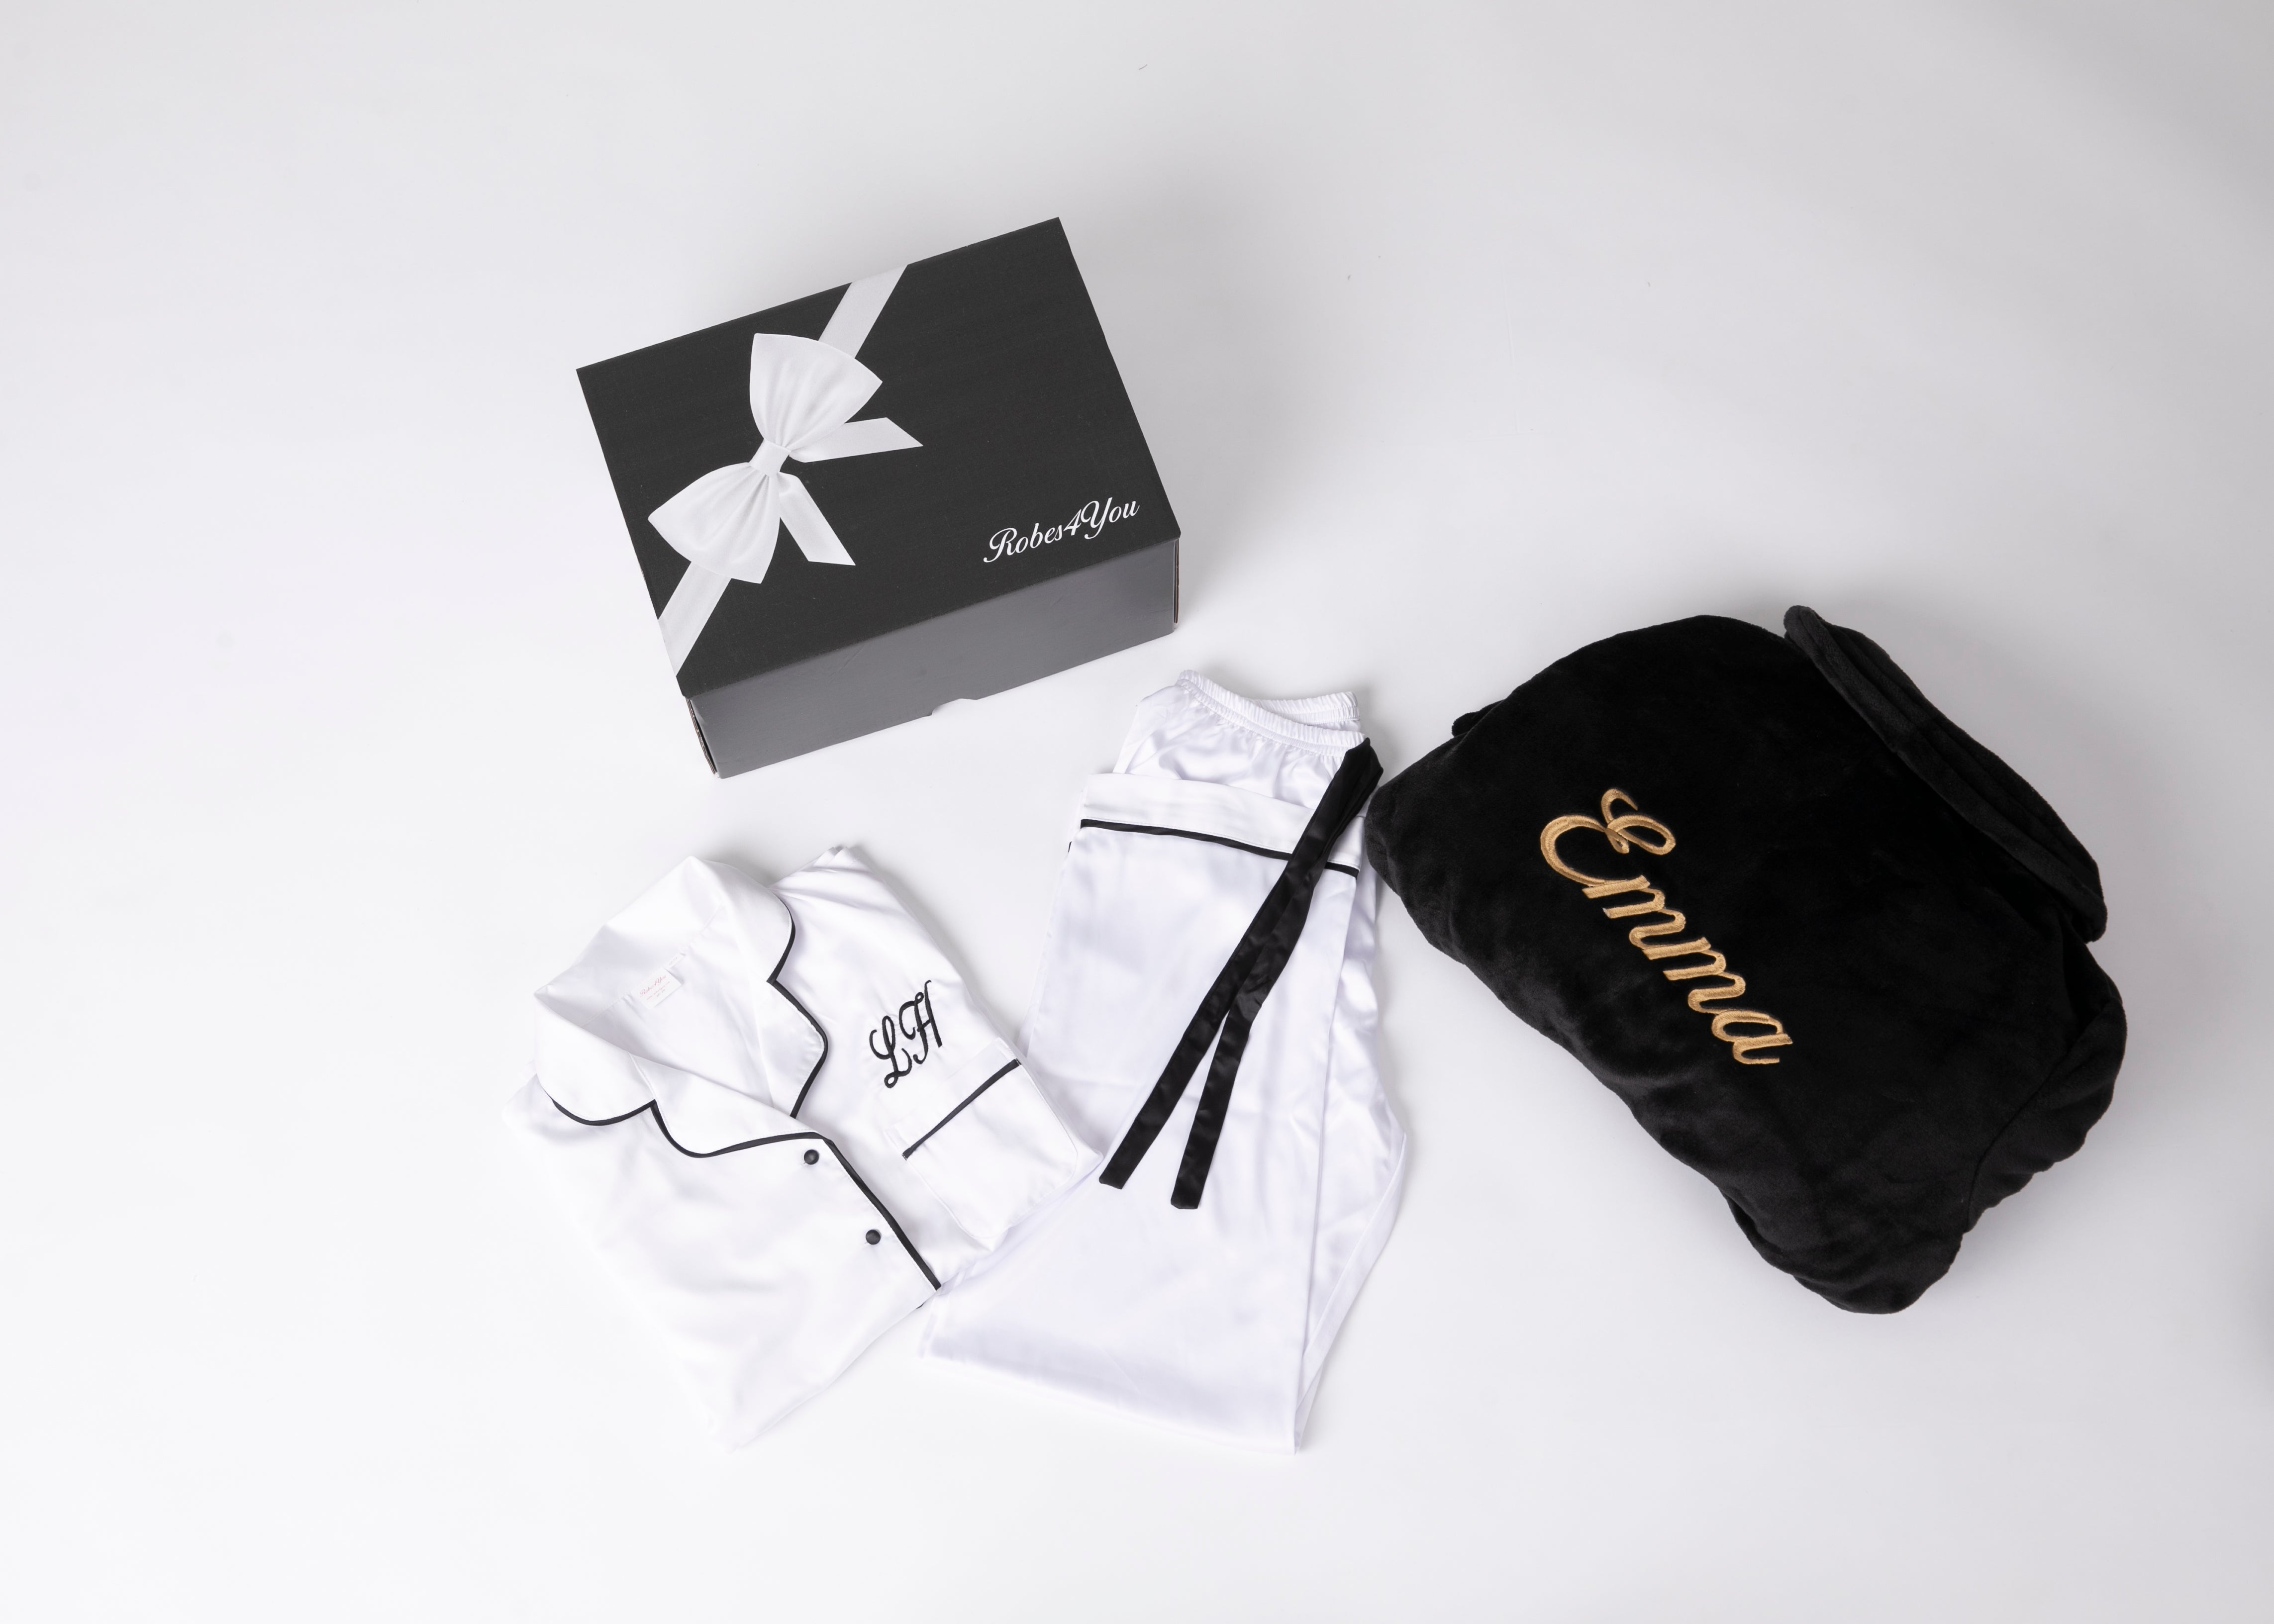 Luxurious Soft Fluffy Robe and Long Satin pyjamas presented in a gift box